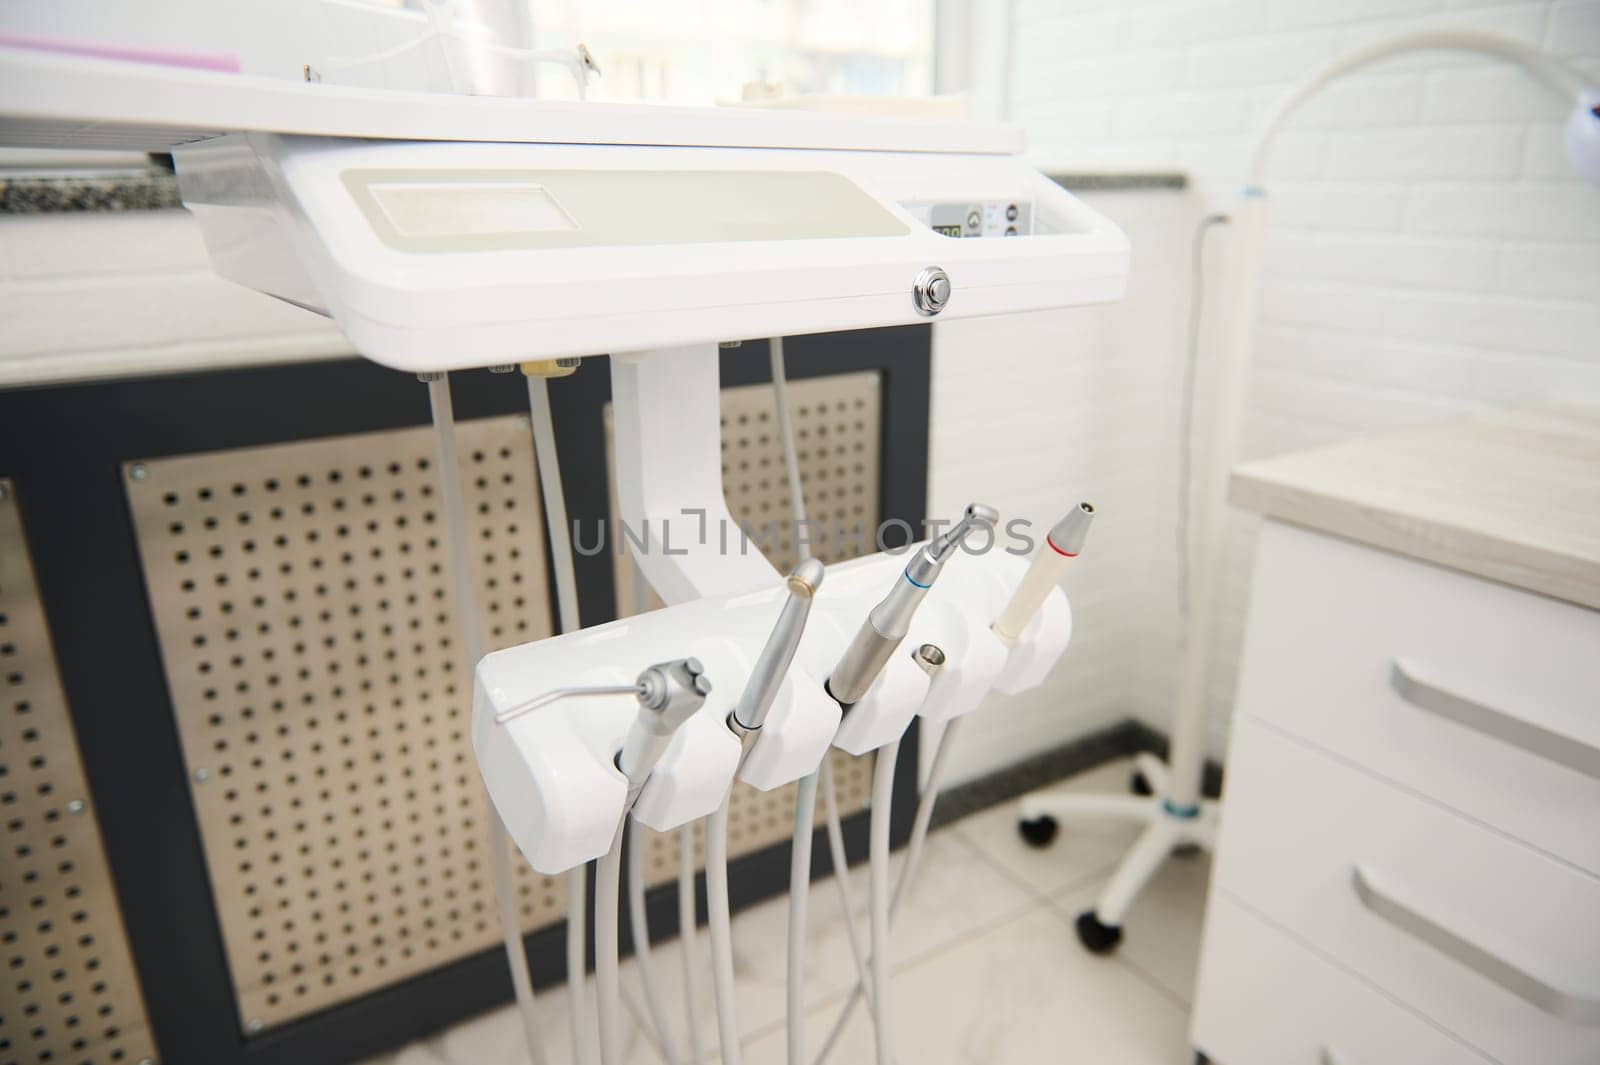 Modern equipment in while light dental office interior. Dentistry. Medical clinic, outpatient hospital. Copy advertising space. Selective focus on dental tools for treating teeth. Dental practice.